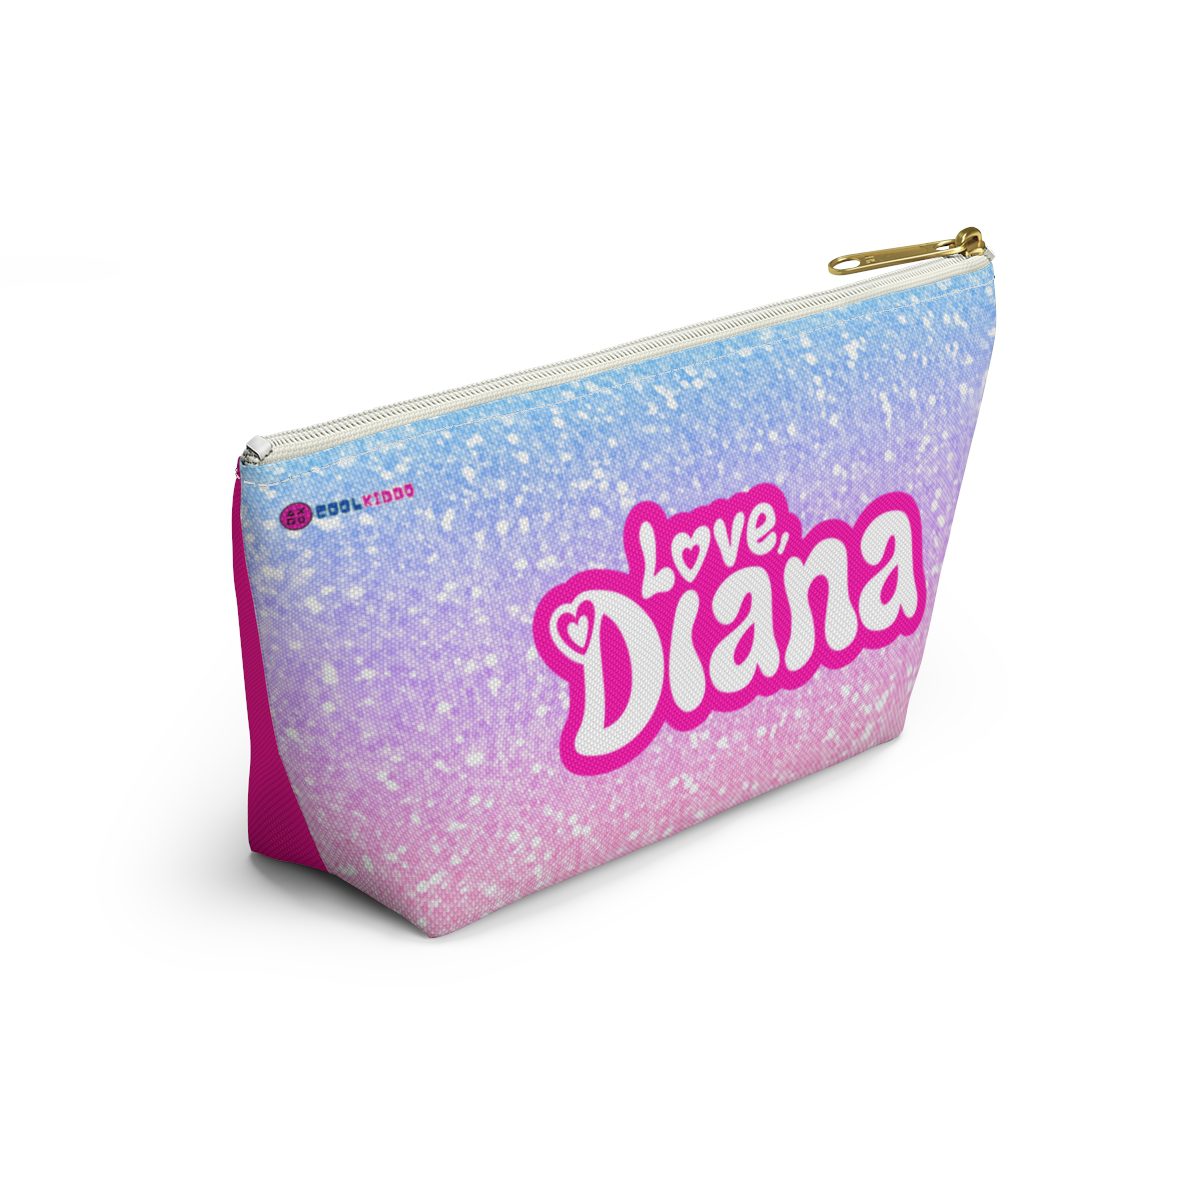 Love Diana Show YouTube Channel Accessory Pouch Cool Kiddo 16